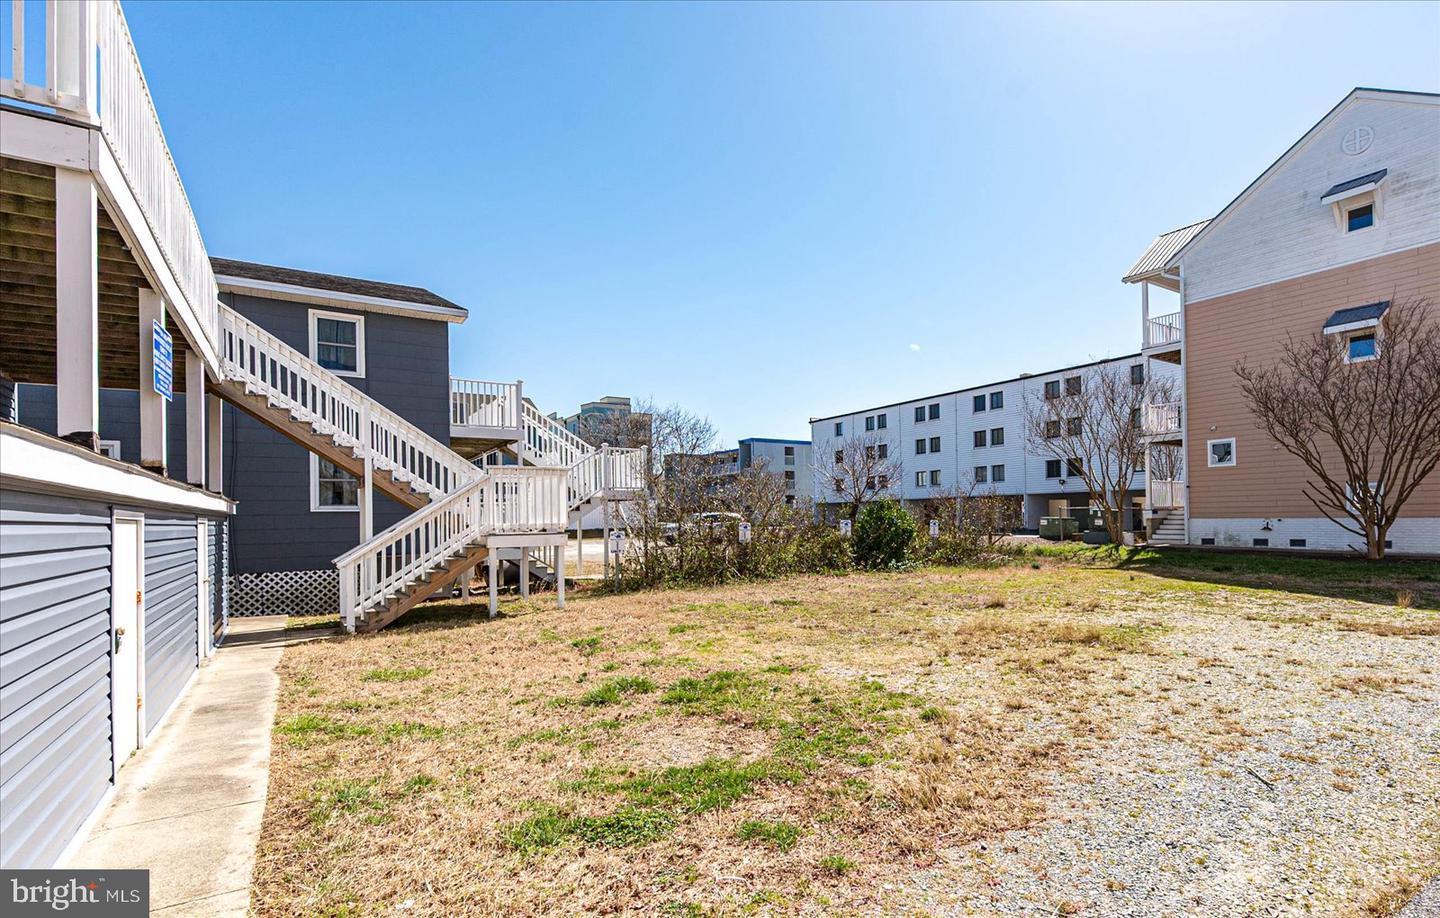 MDWO2019490-802929060578-2024-03-16-10-46-20 15 57th St | Ocean City, MD Real Estate For Sale | MLS# Mdwo2019490  - 1st Choice Properties